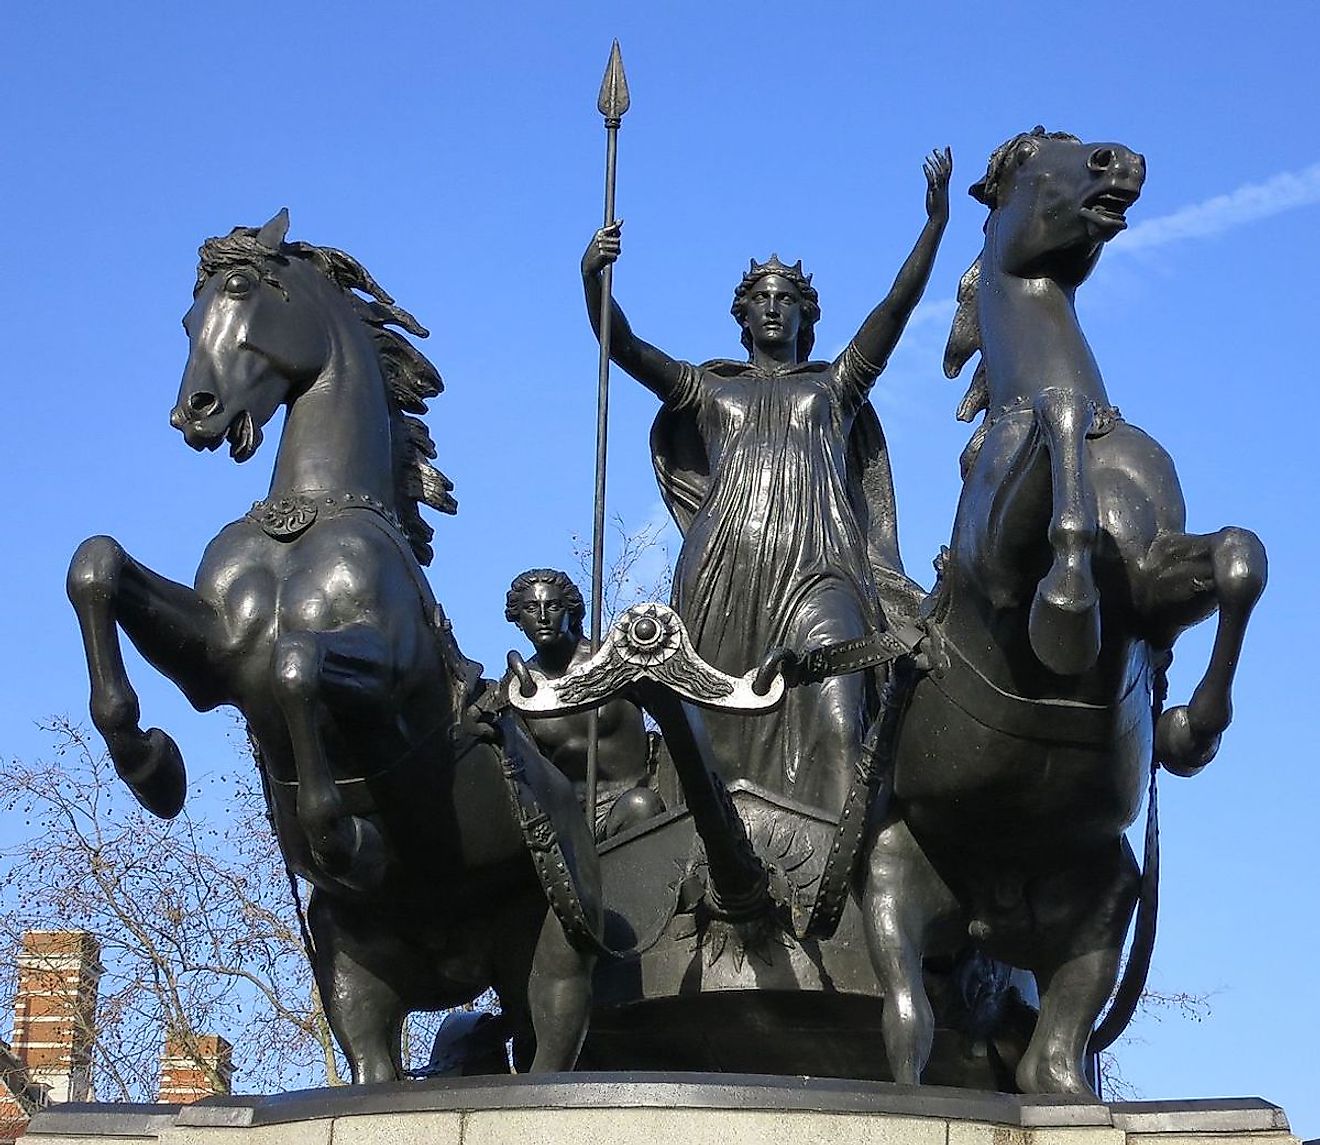 Boudica statue, Westminster. Image credit: Paul Walter/Wikimedia.org